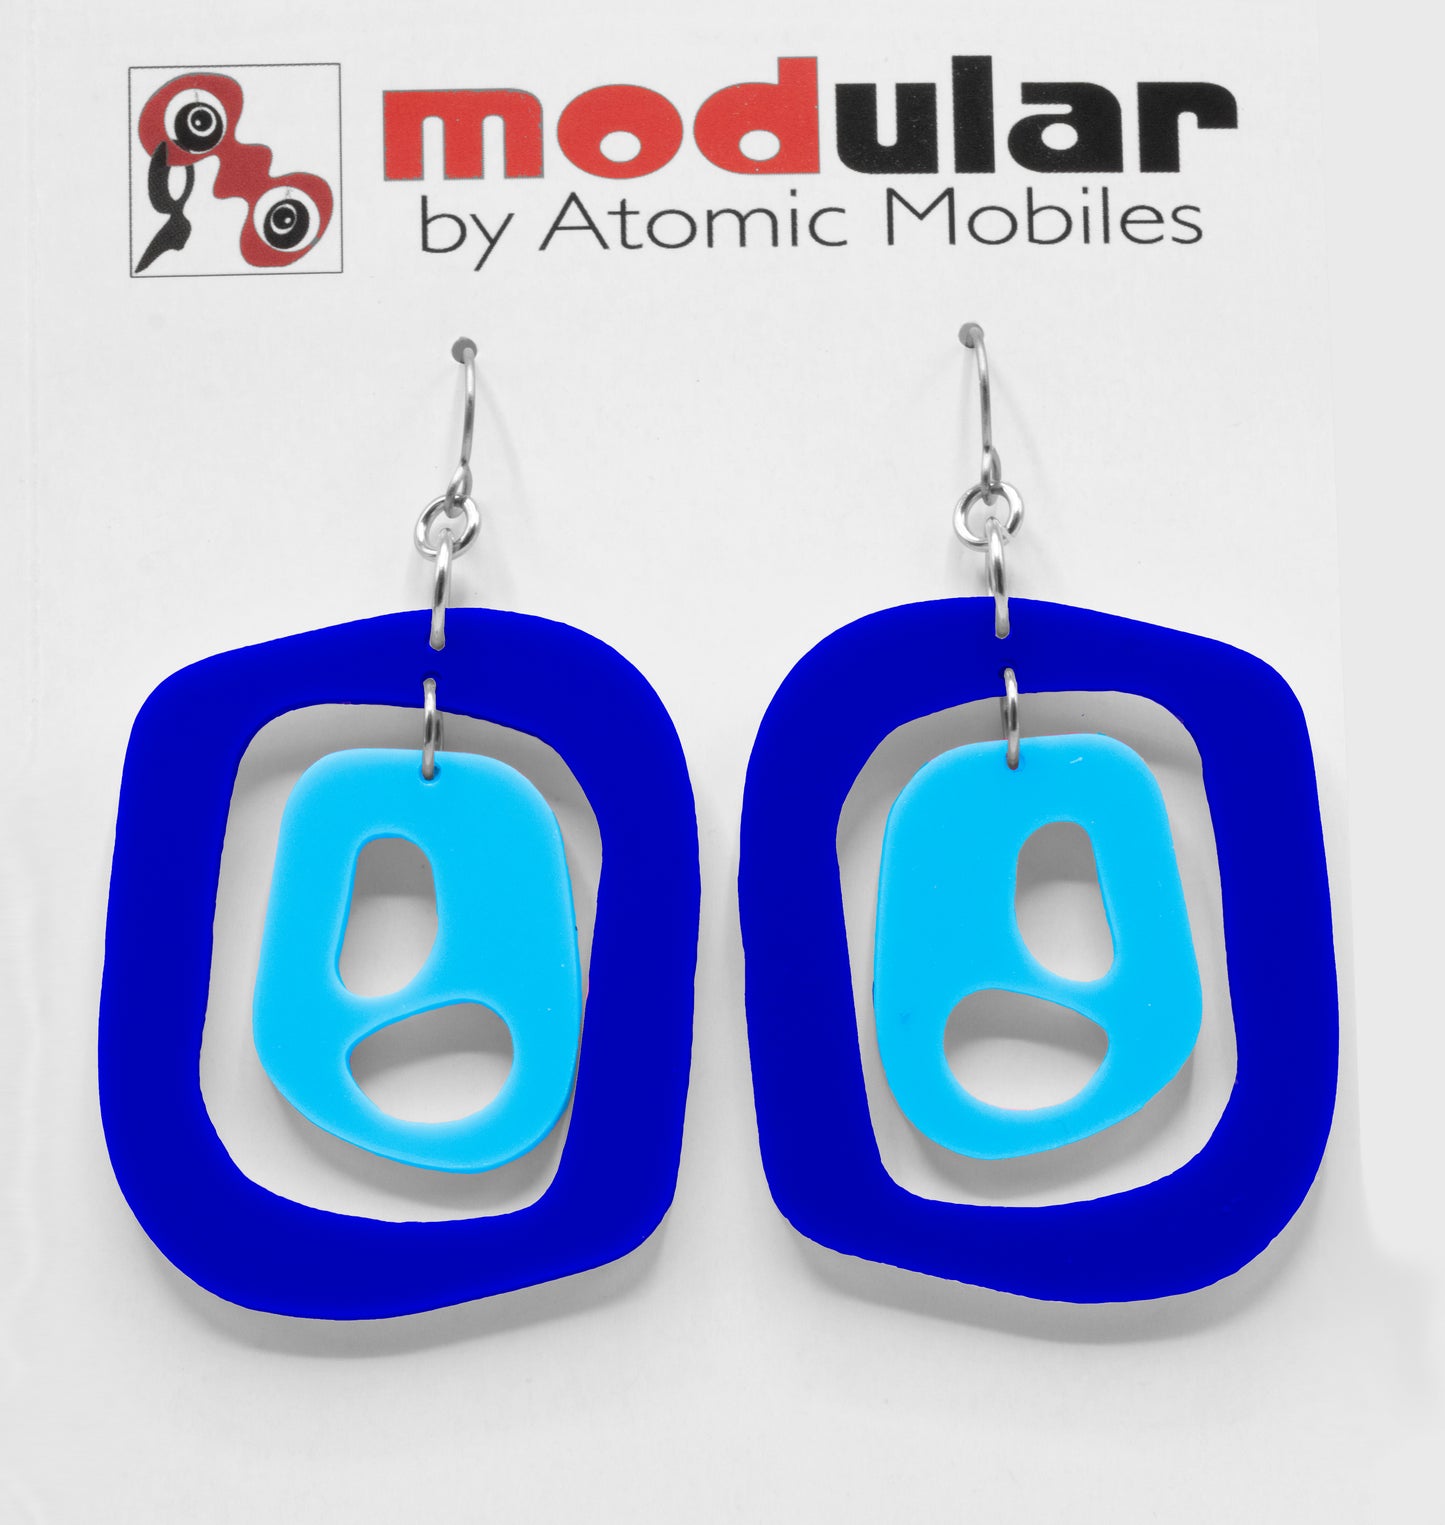 MODular Earrings - Mid 20th Statement Earrings in Navy Blue by AtomicMobiles.com - retro era mod handmade jewelry